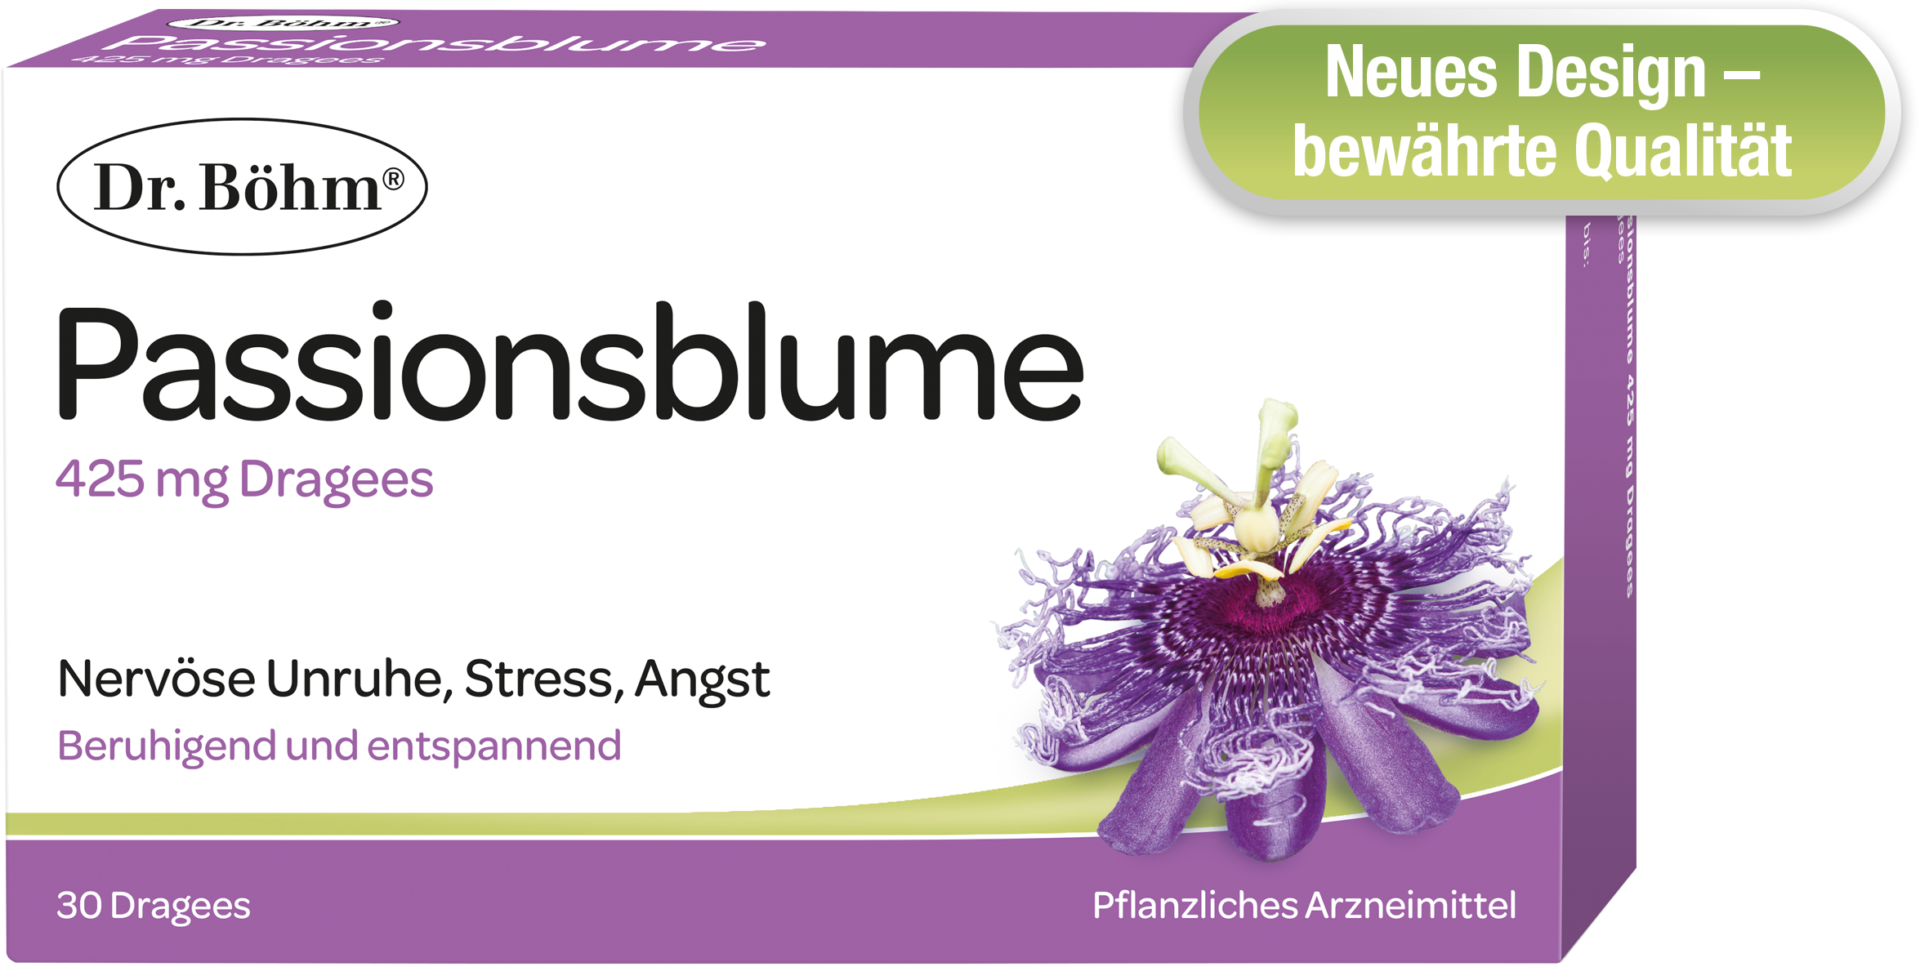 Neues Design - Dr. Böhm® Passionsblume 425 mg Dragees